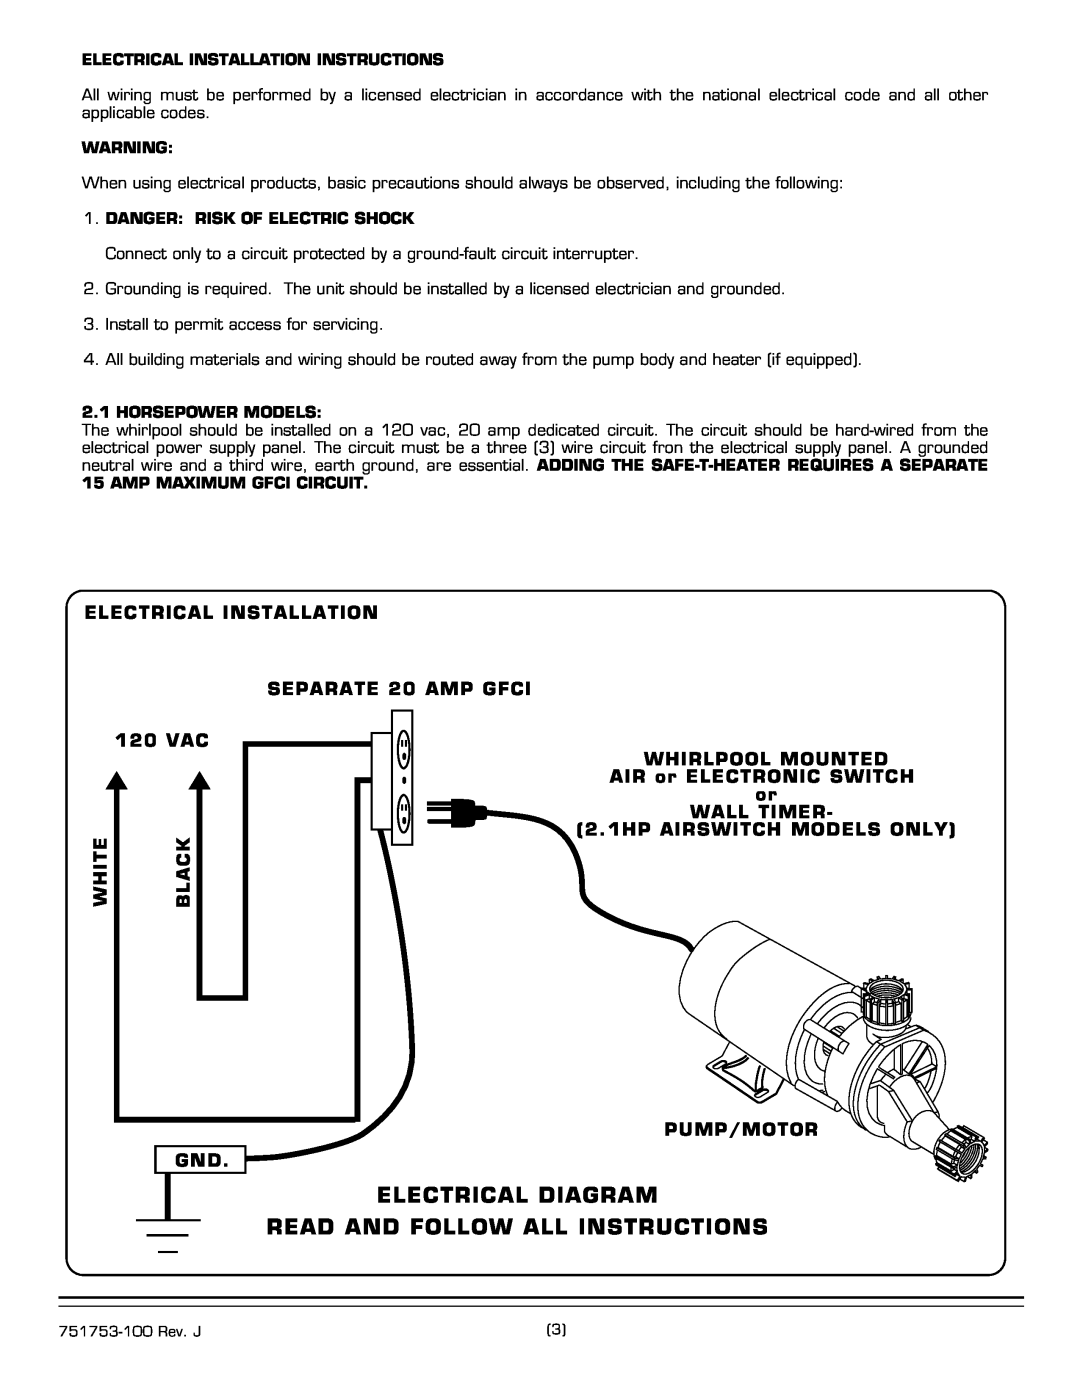 American Standard 2709.XXXW installation instructions Electrical Diagram Read And Follow All Instructions 